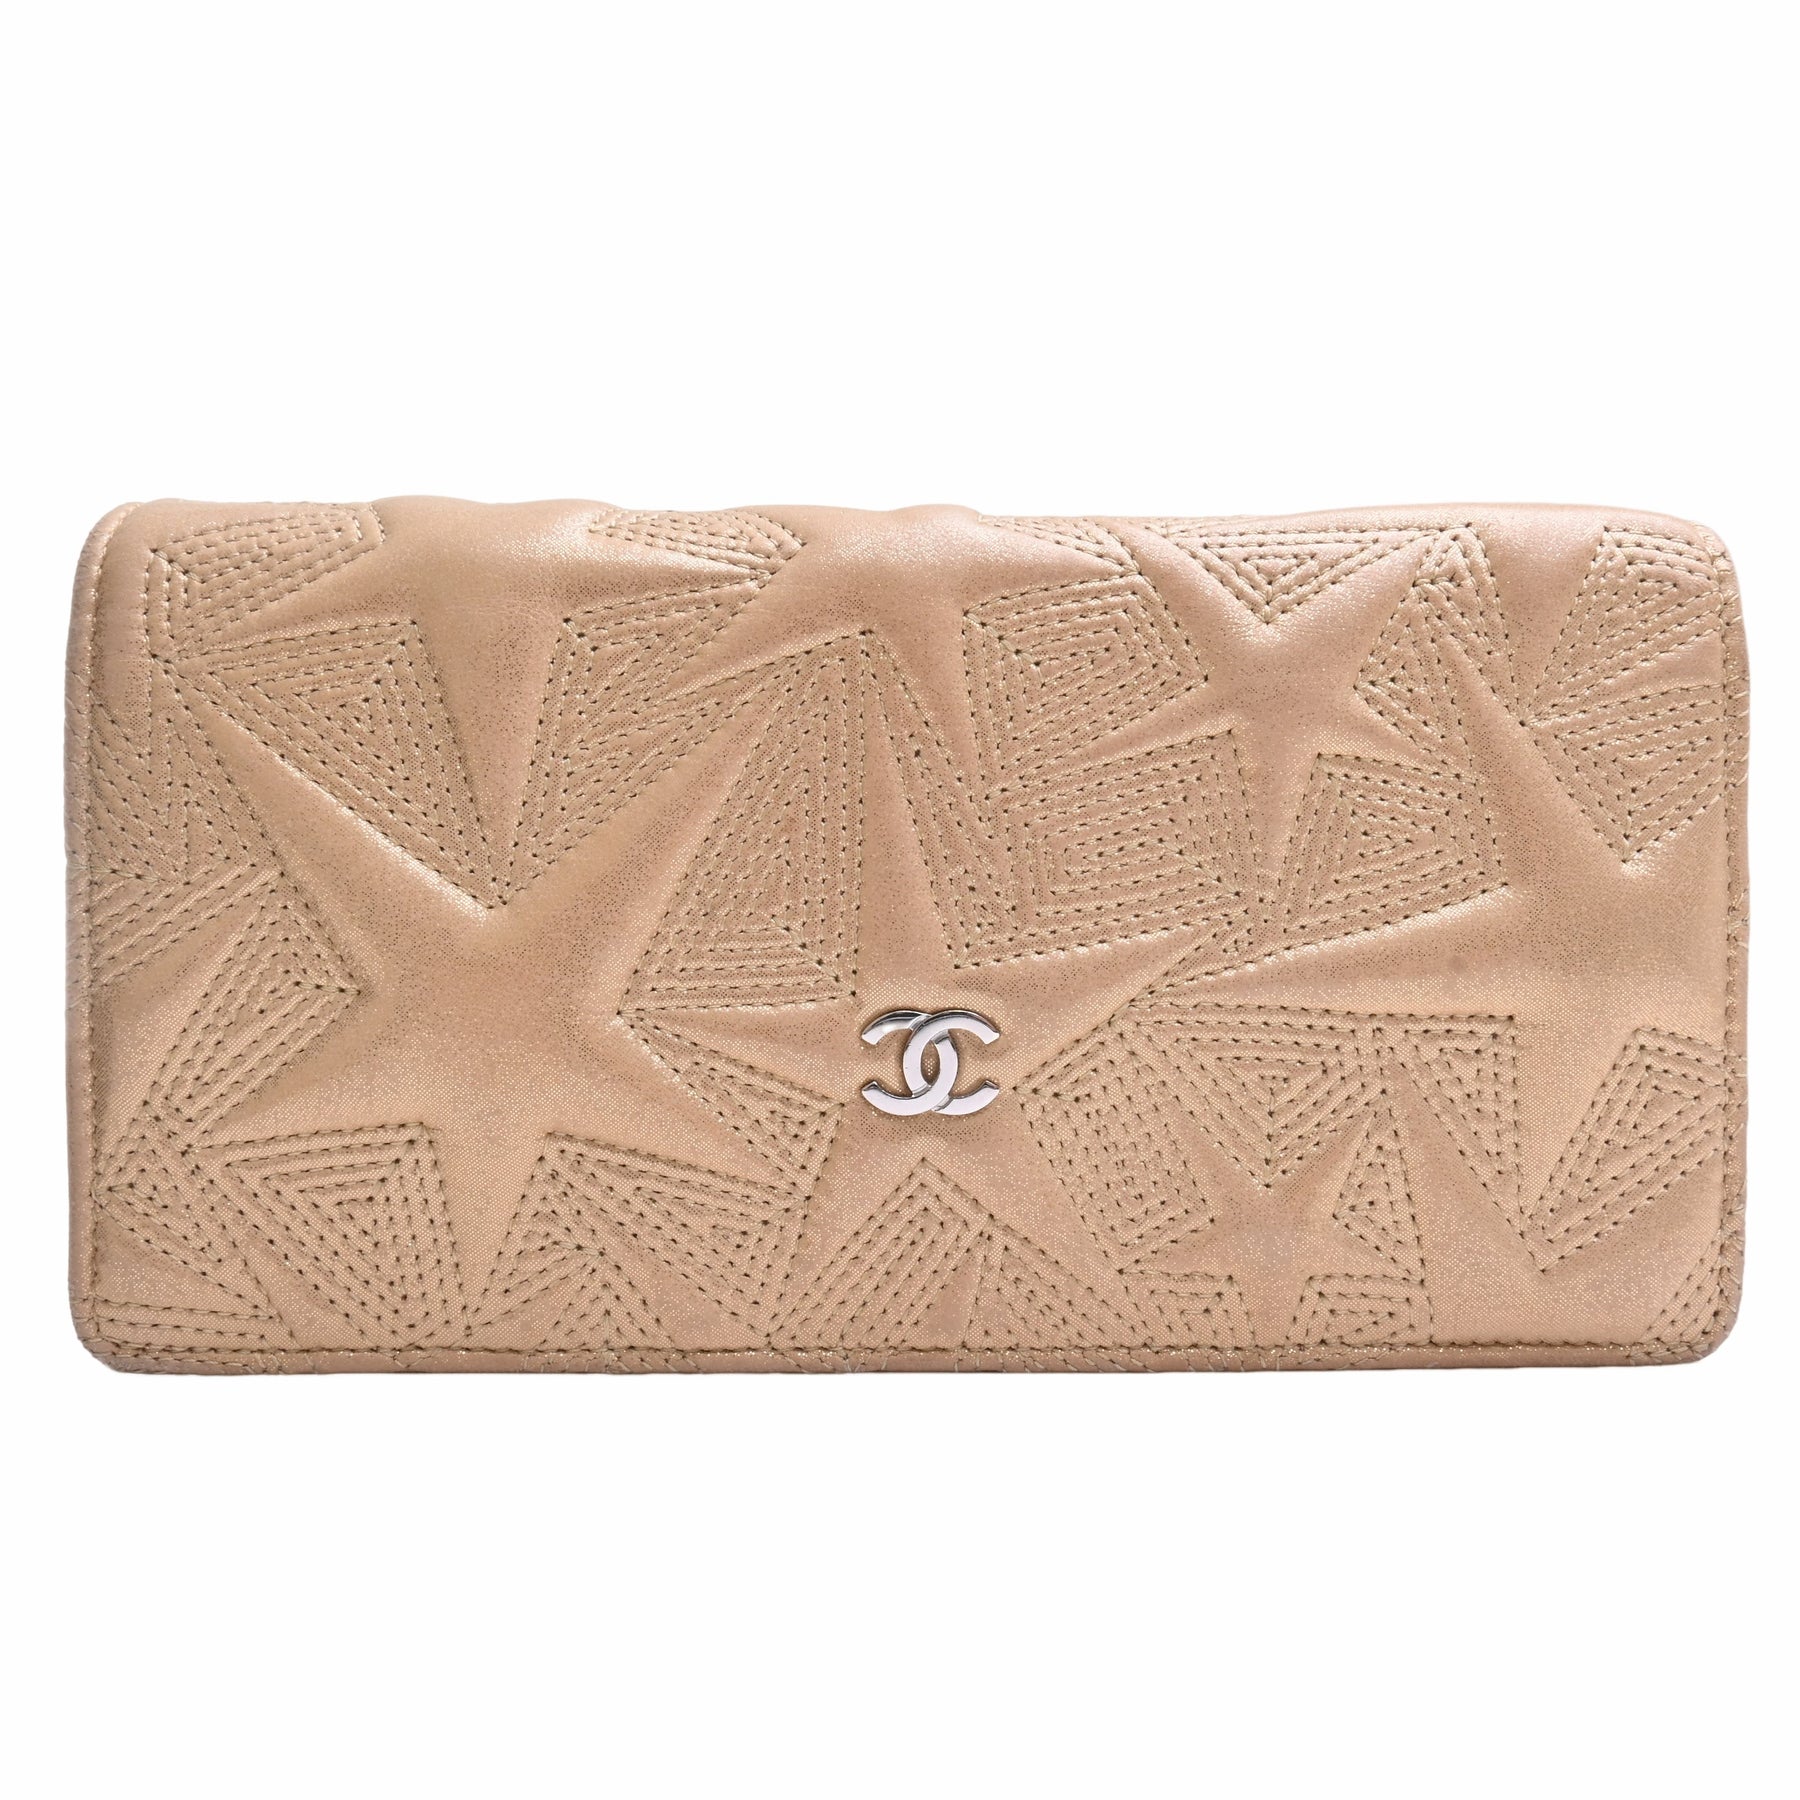 Chanel long wallet leather gold box G card – co&co